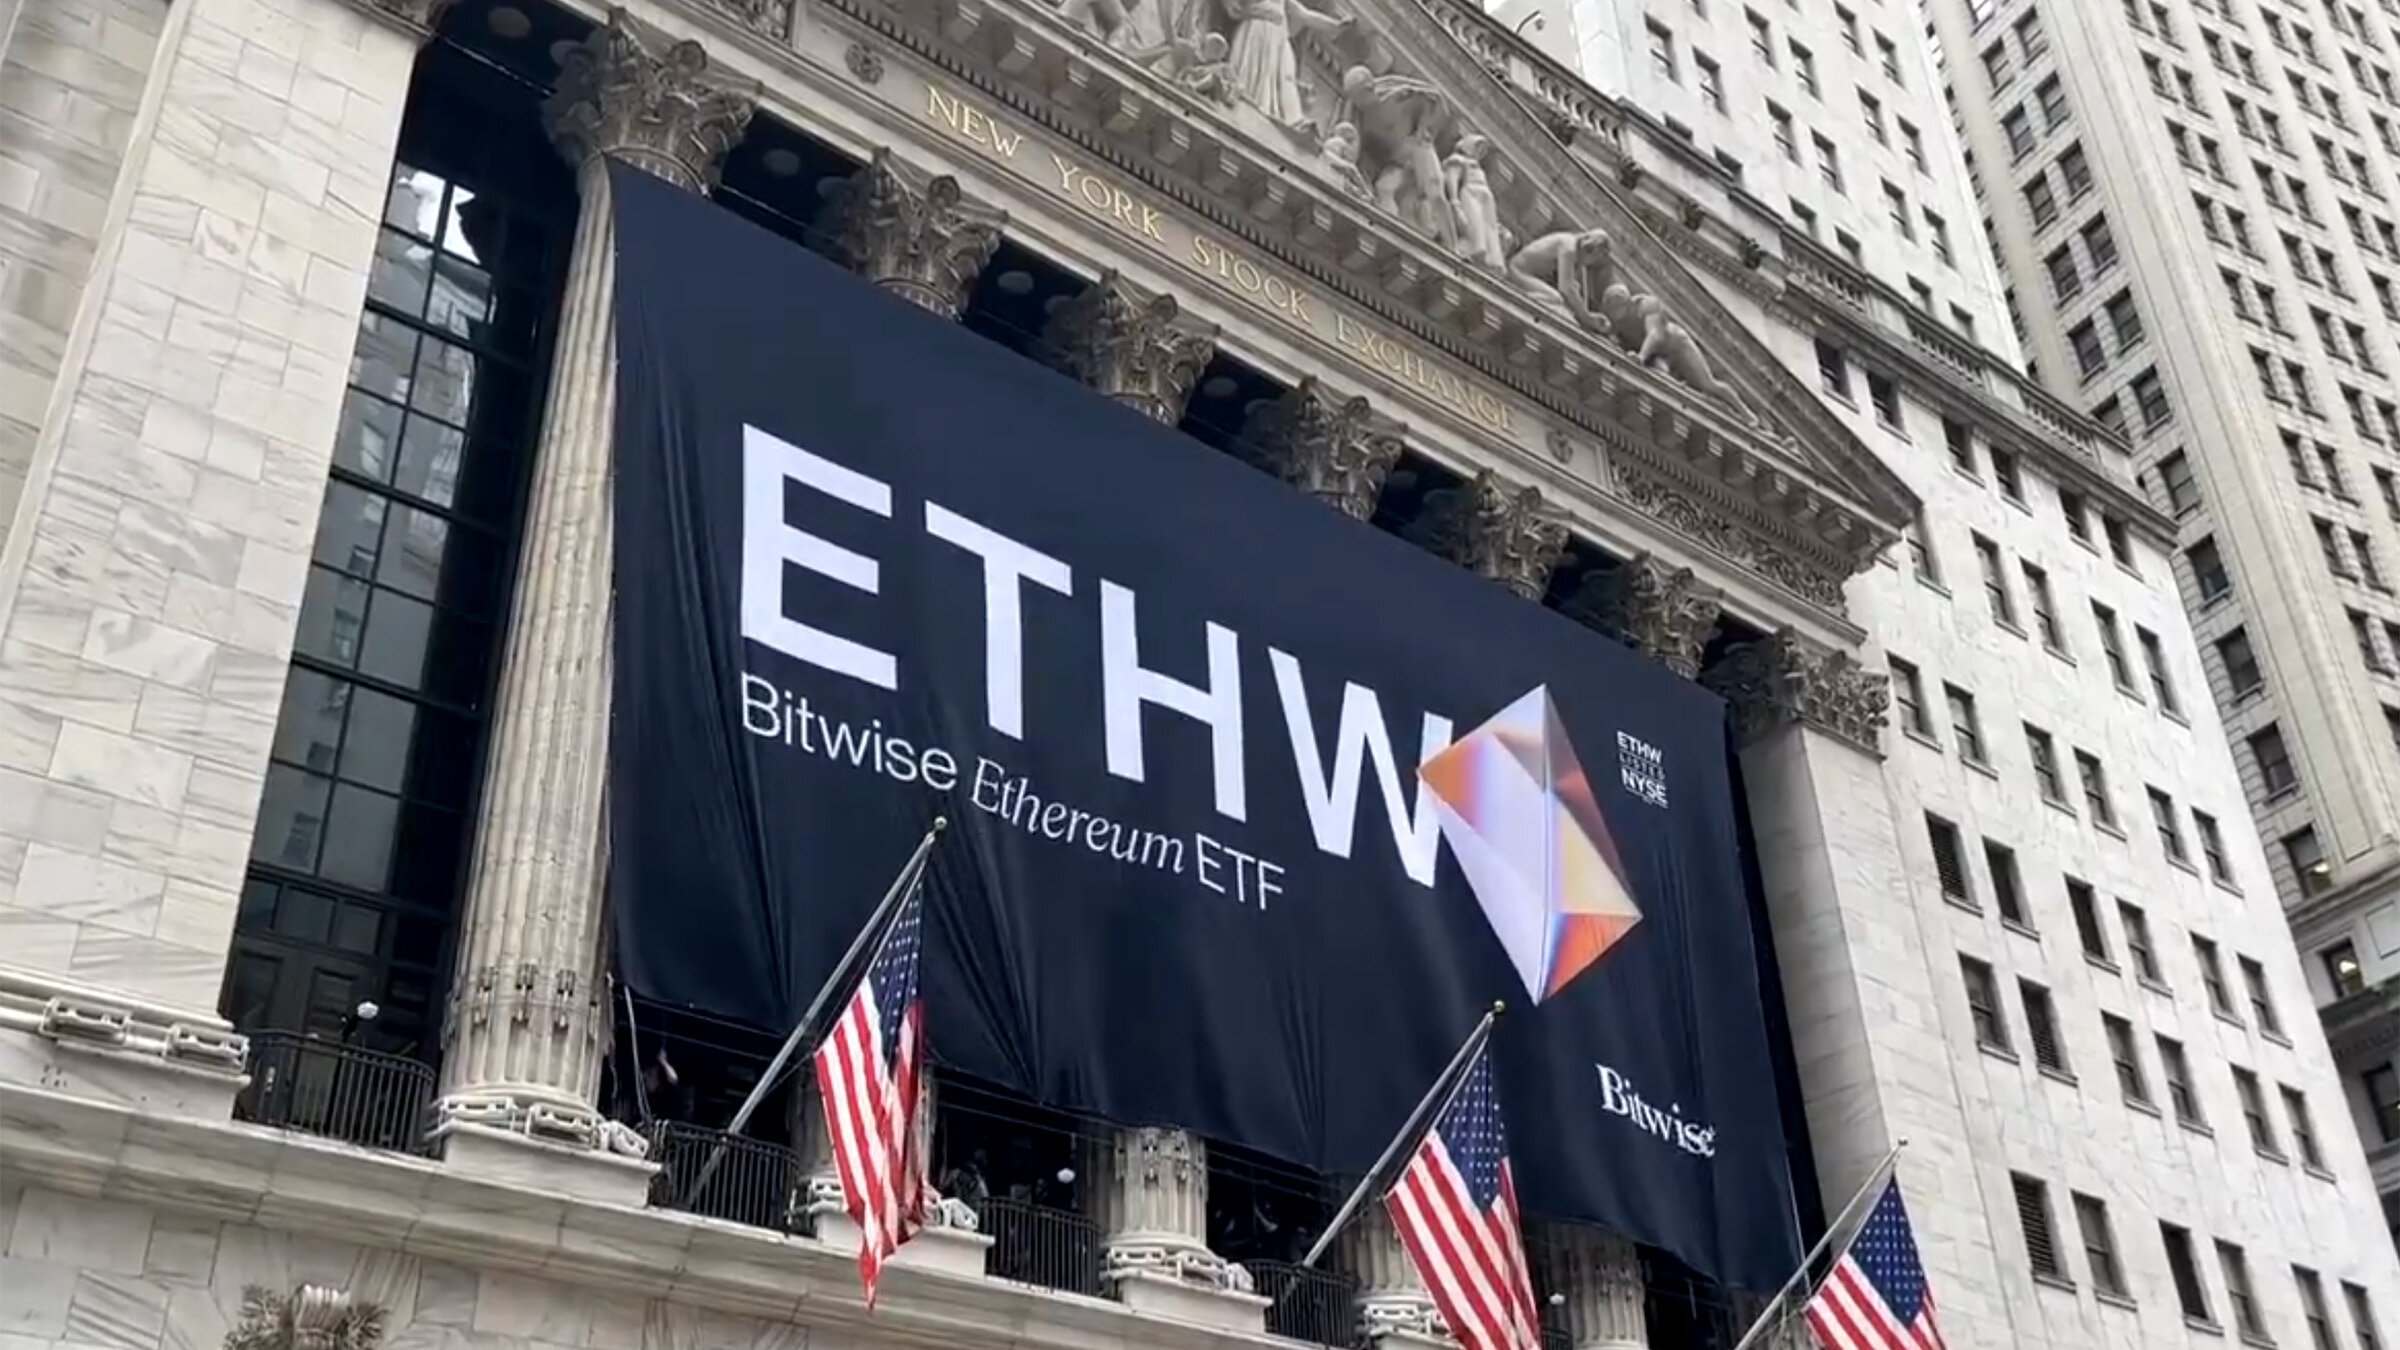 Bitwise Ethereum ETF Banner Hung on New York Stock Exchange